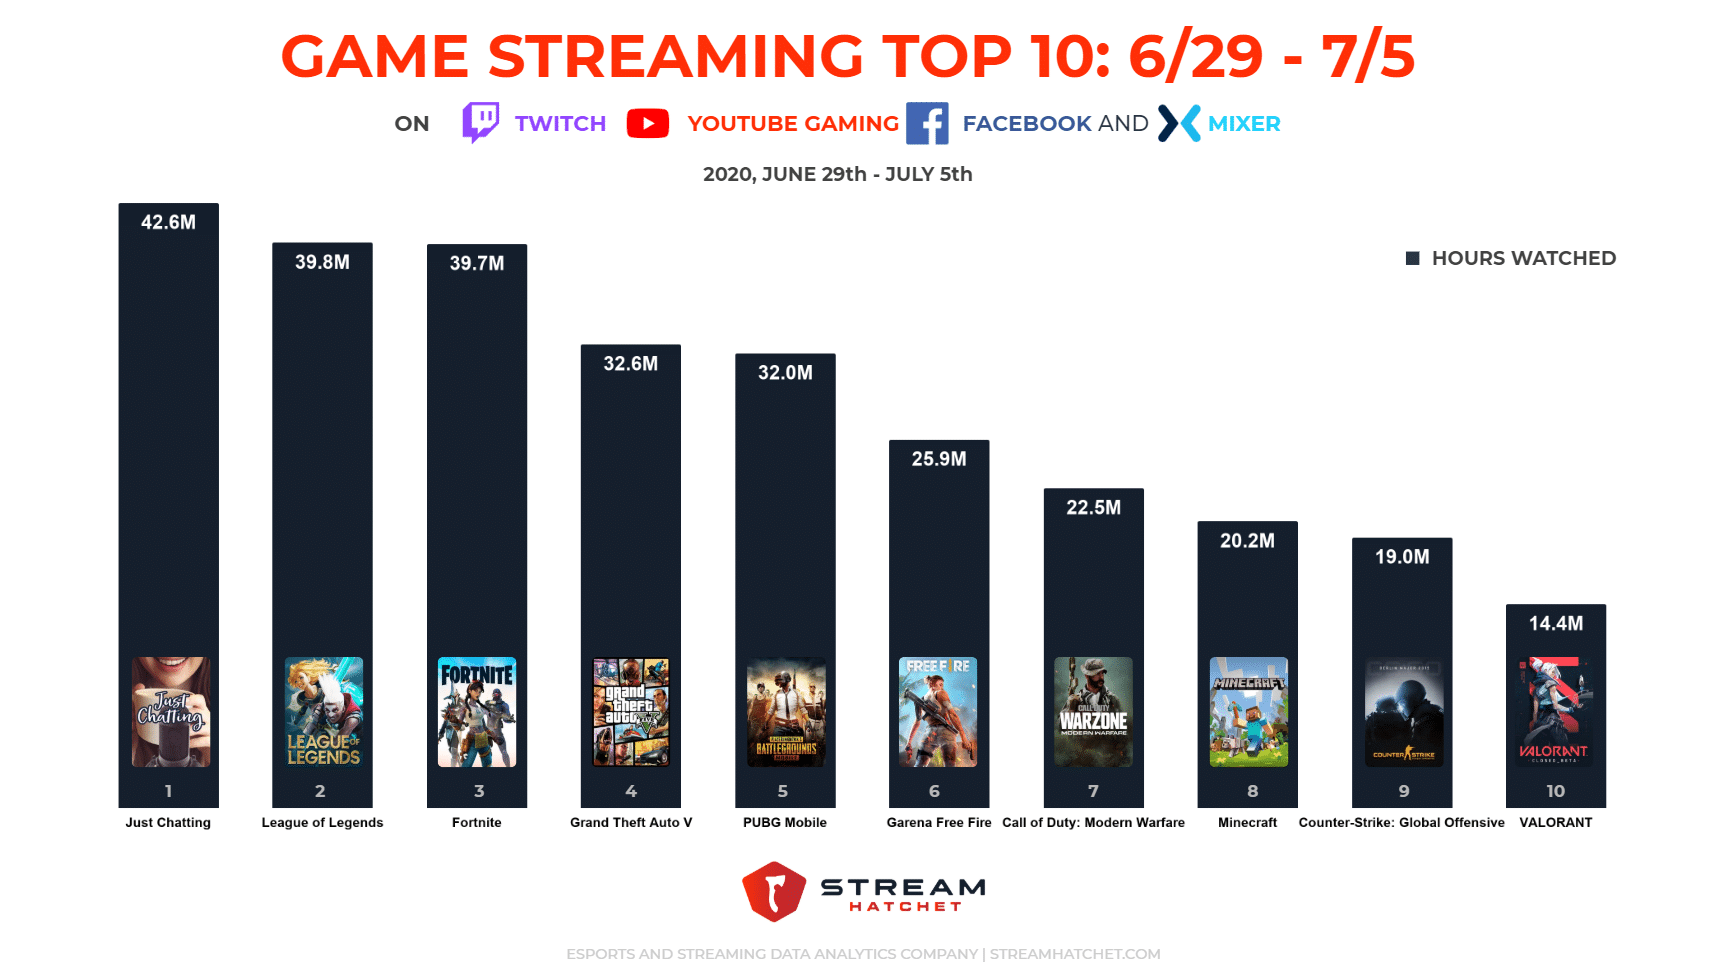 Top 10 Most Watched Games on